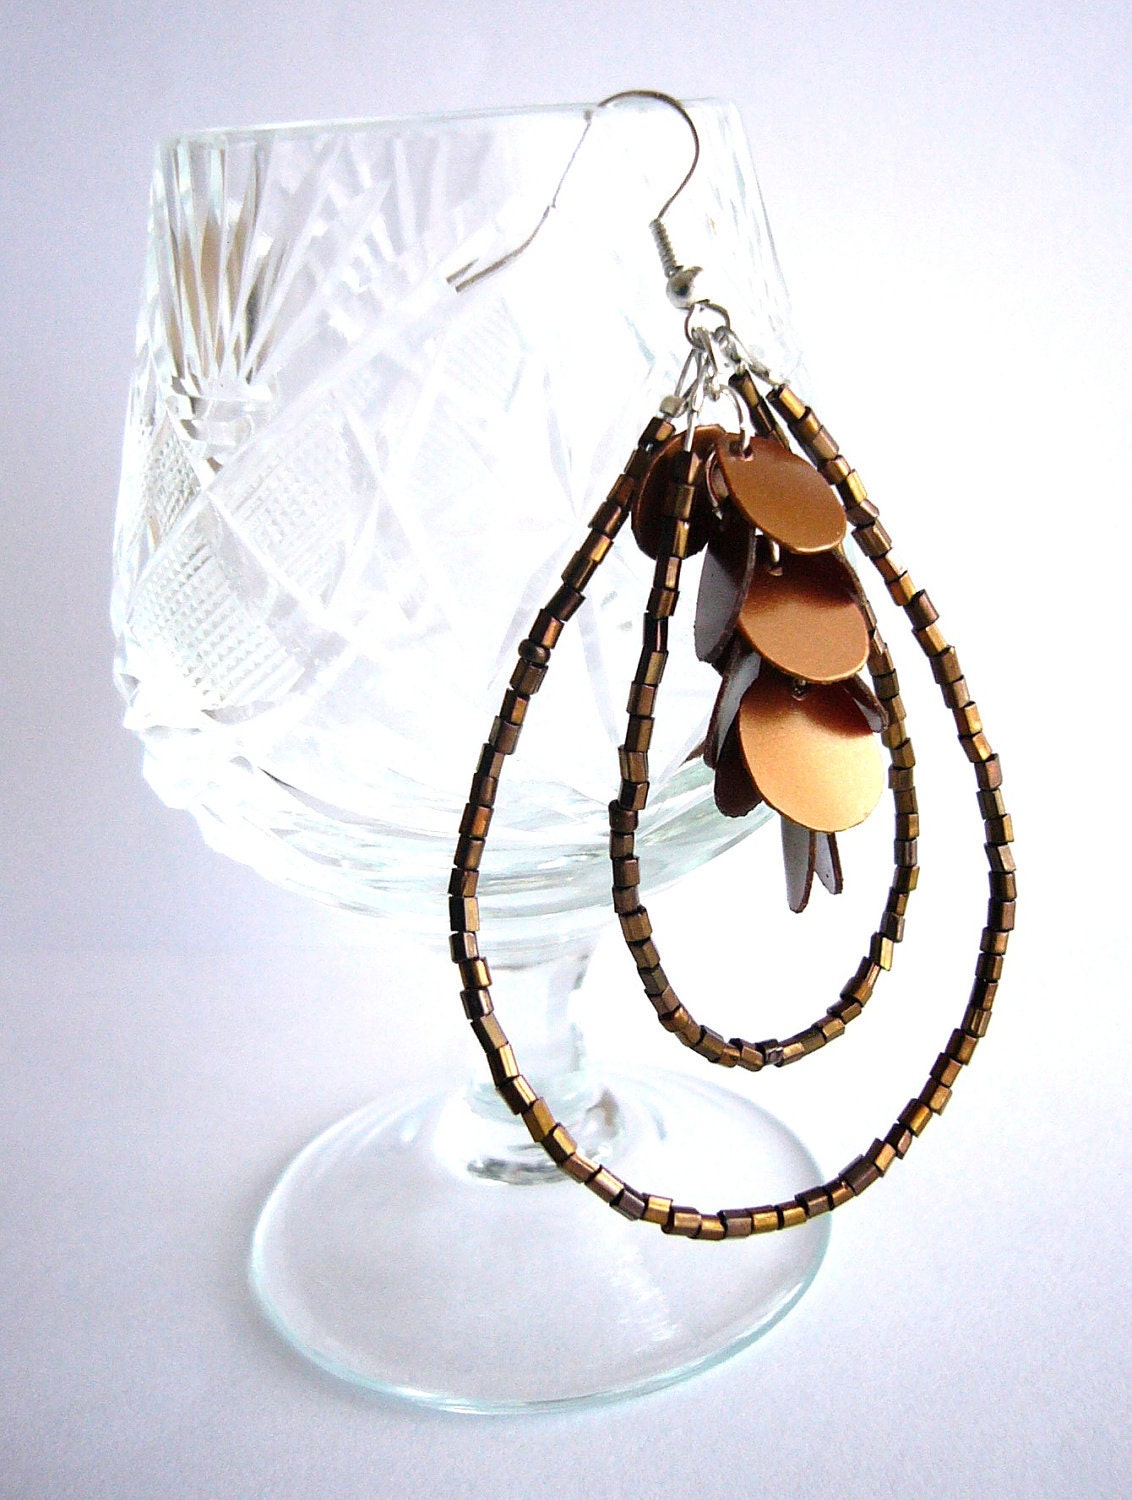 Recycled plastic bottle chandelier earrings boho style - upcycled jewelry, eco friendly, sustainable - Between gold and copper